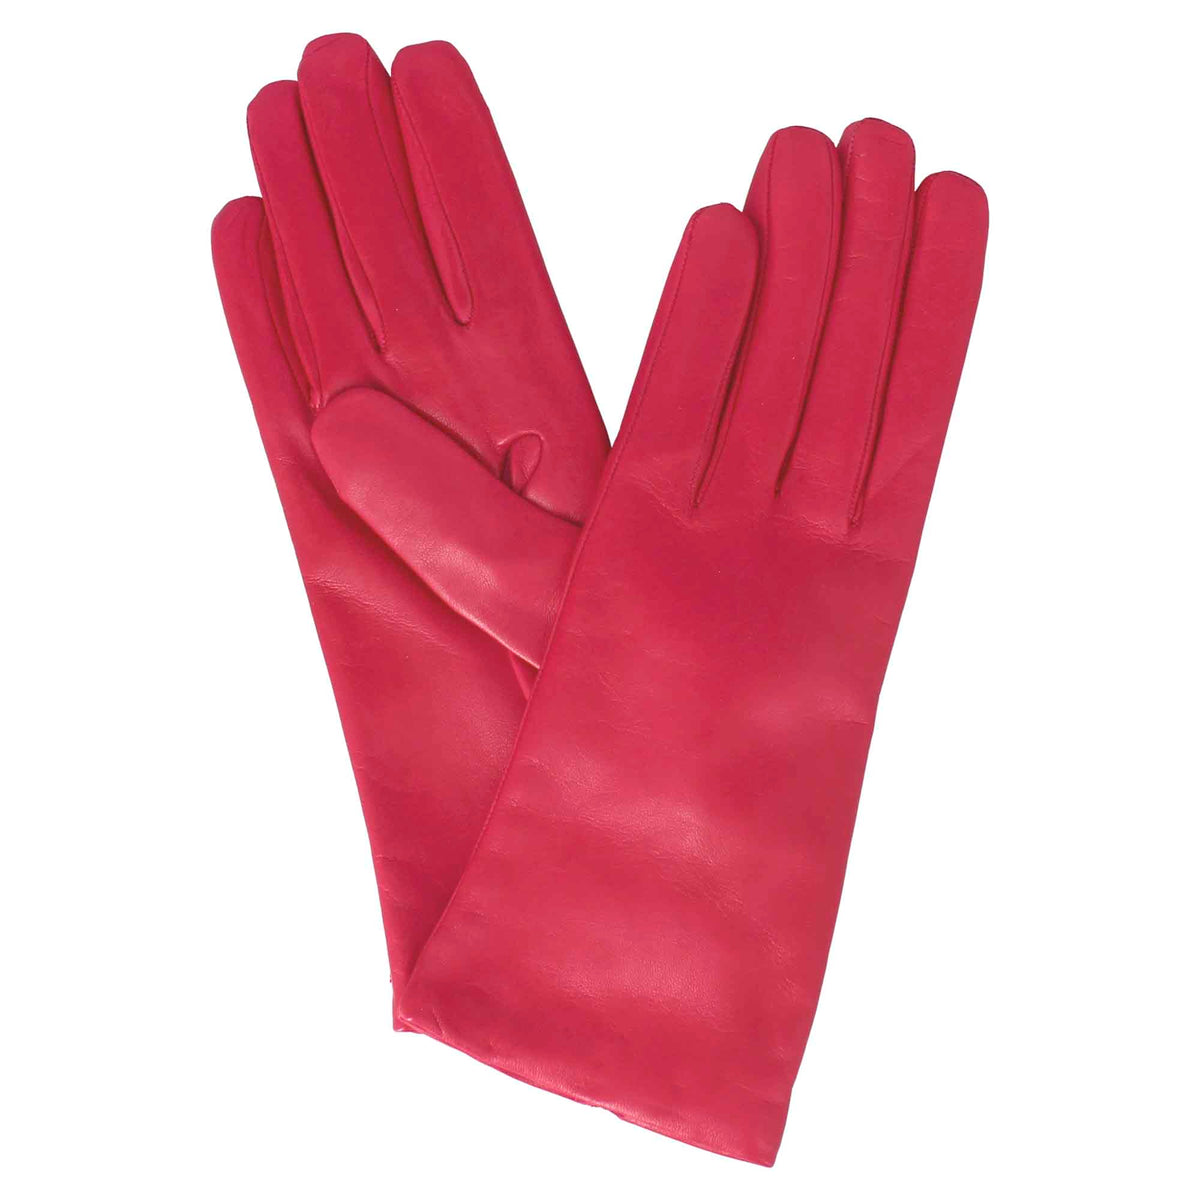 Women's glove in smooth fuchsia leather with cashmere lining